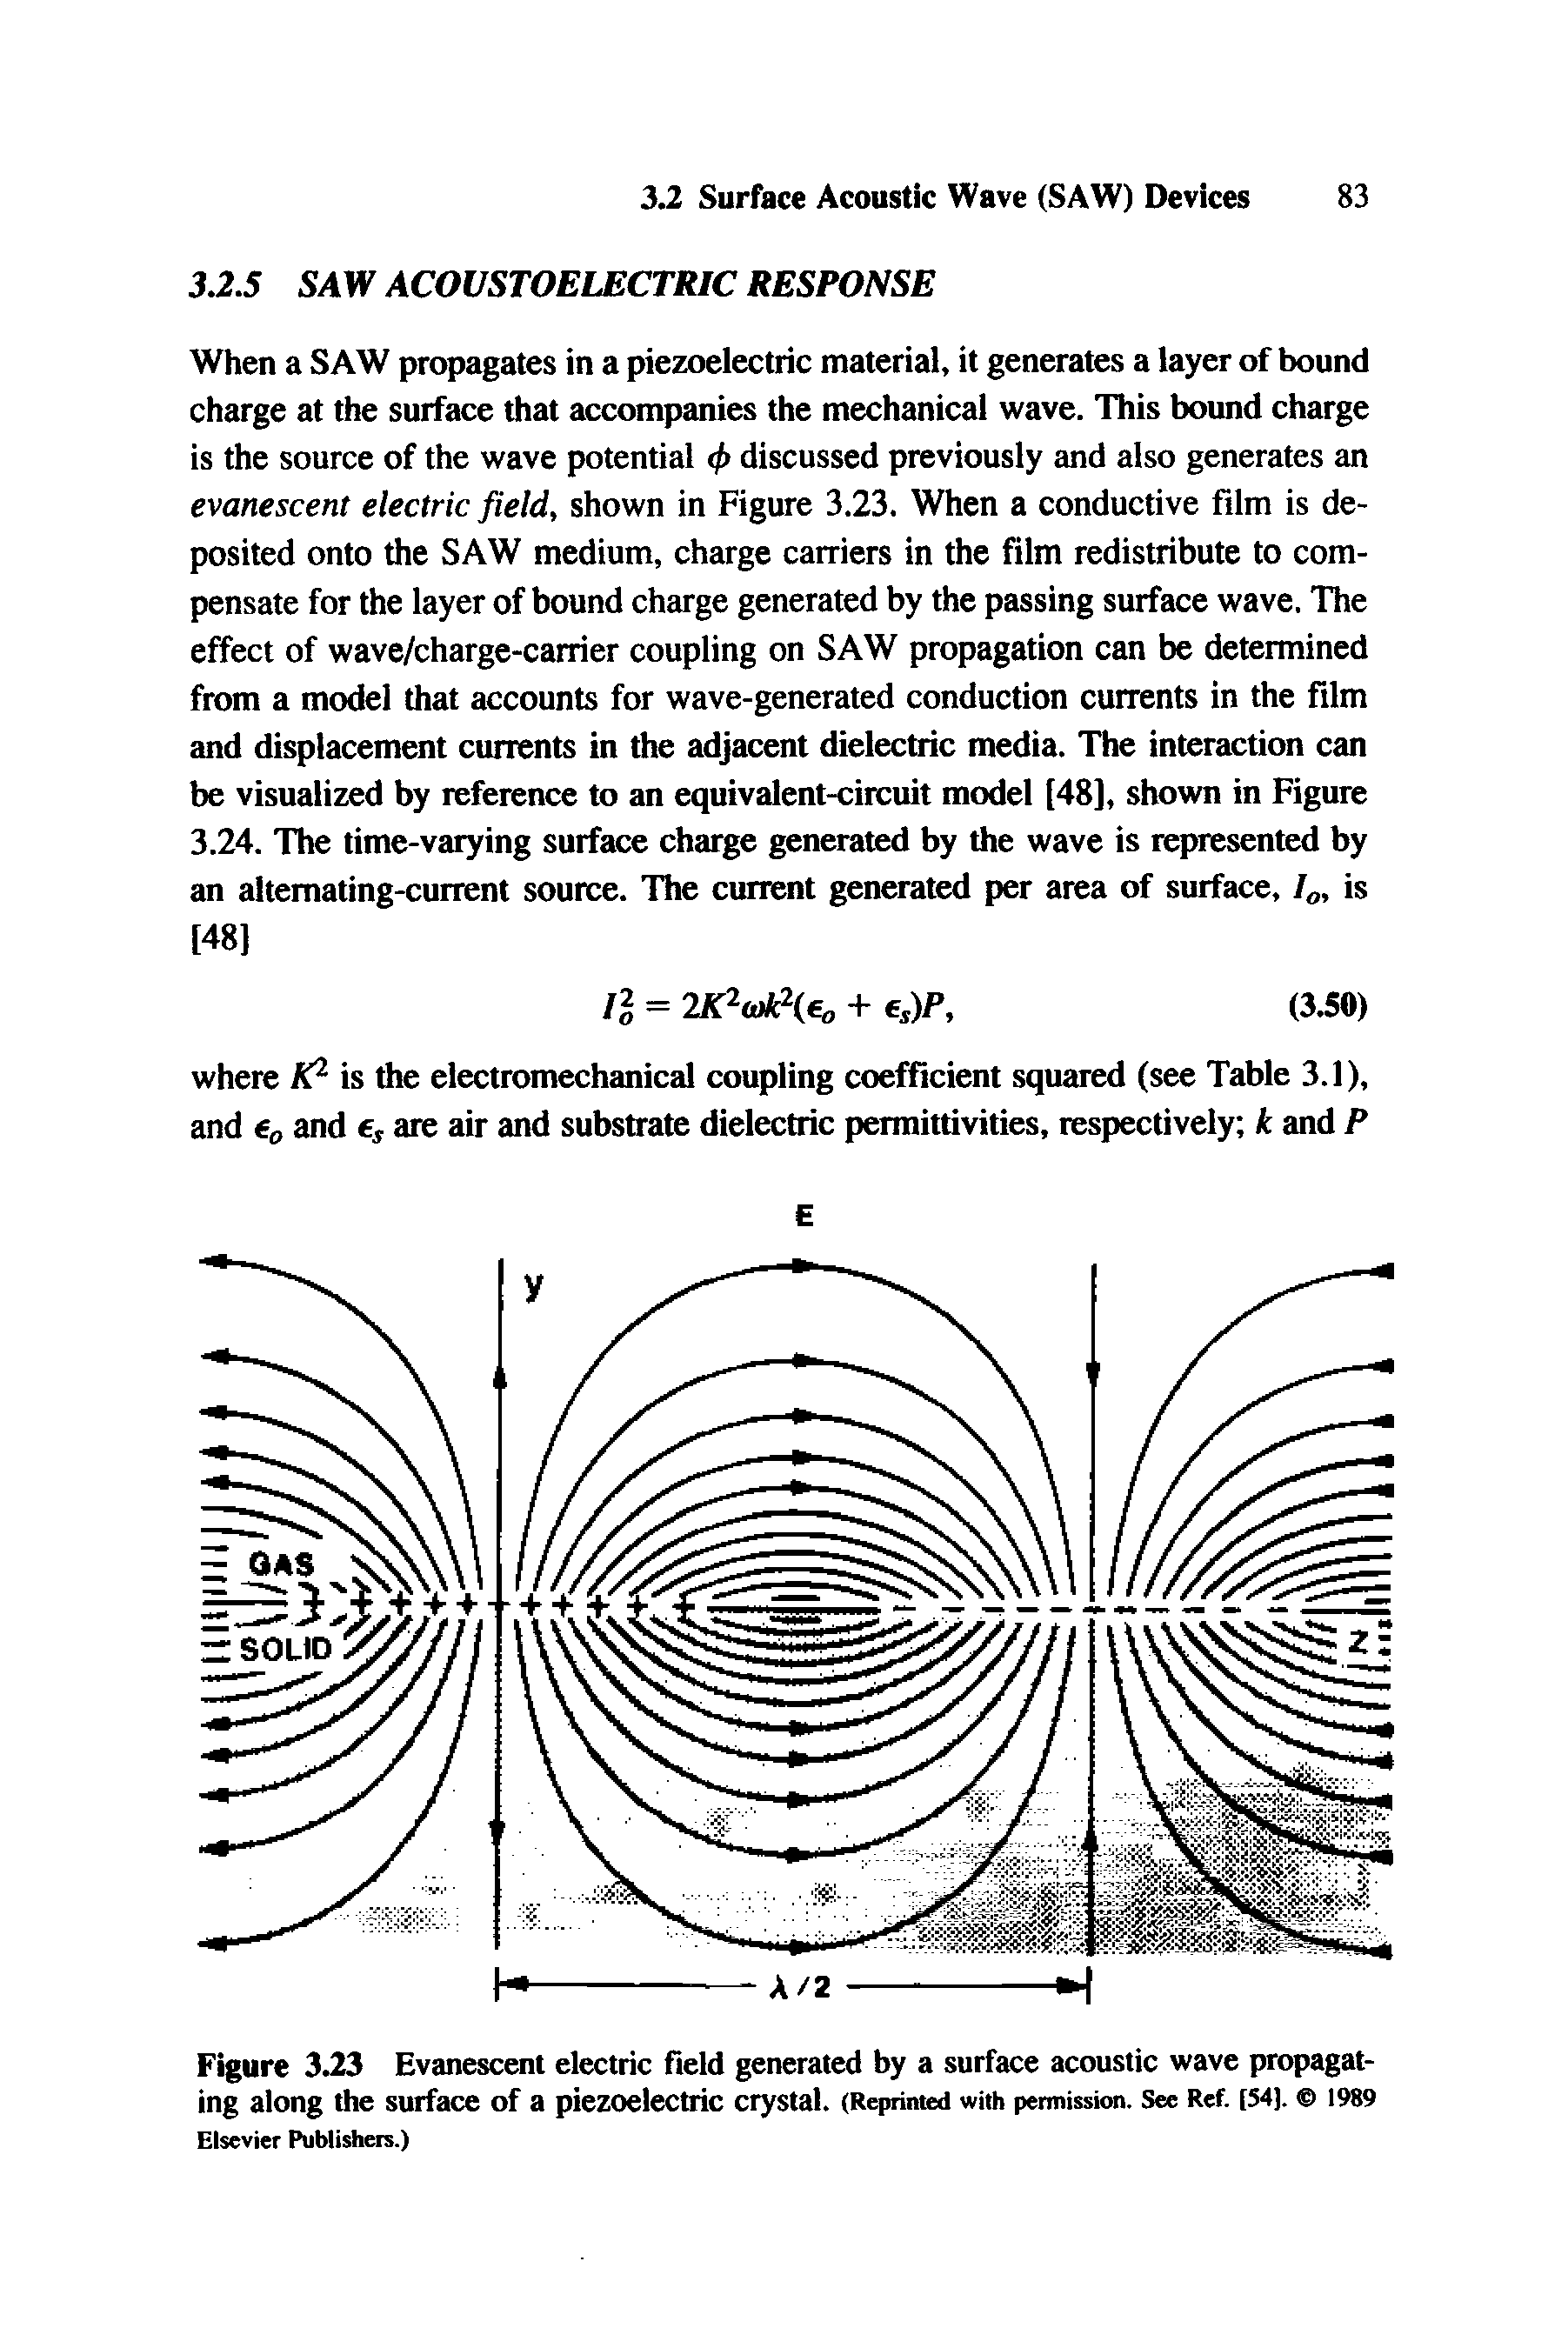 Figure 3.23 Evanescent electric field generated by a surface acoustic wave propagating along the surface of a piezoelectric crystal. (Reprinted with permission. See Ref. [54], 1989 Elsevier Publishers.)...